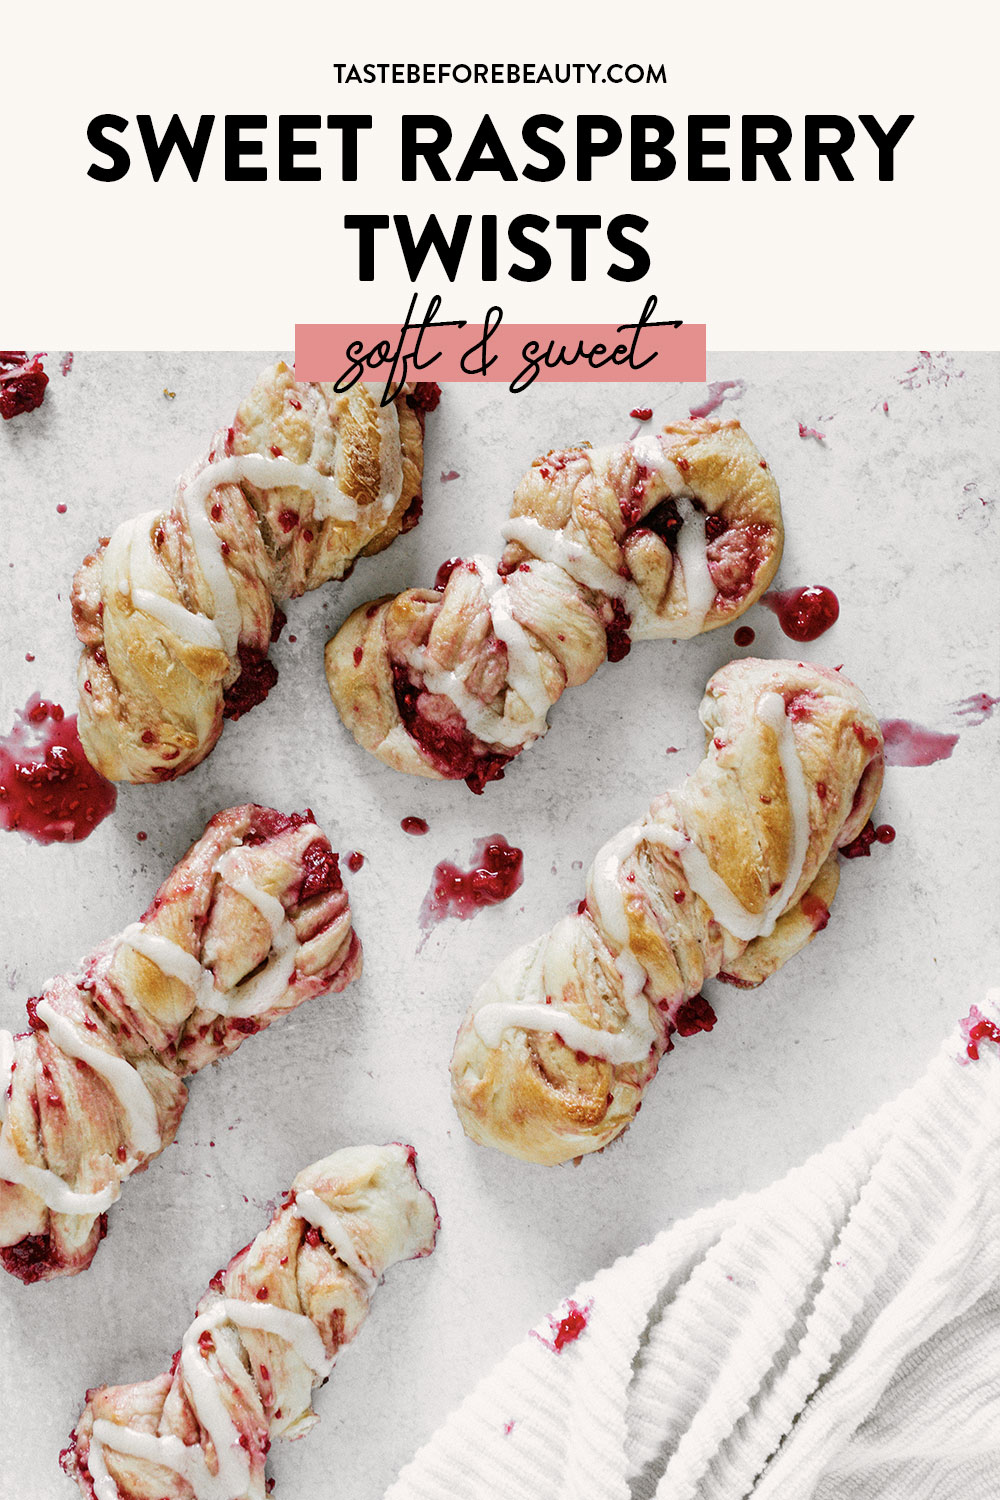 taste before beauty sweet raspberry twists with icing and raspberry on table pinterest pin